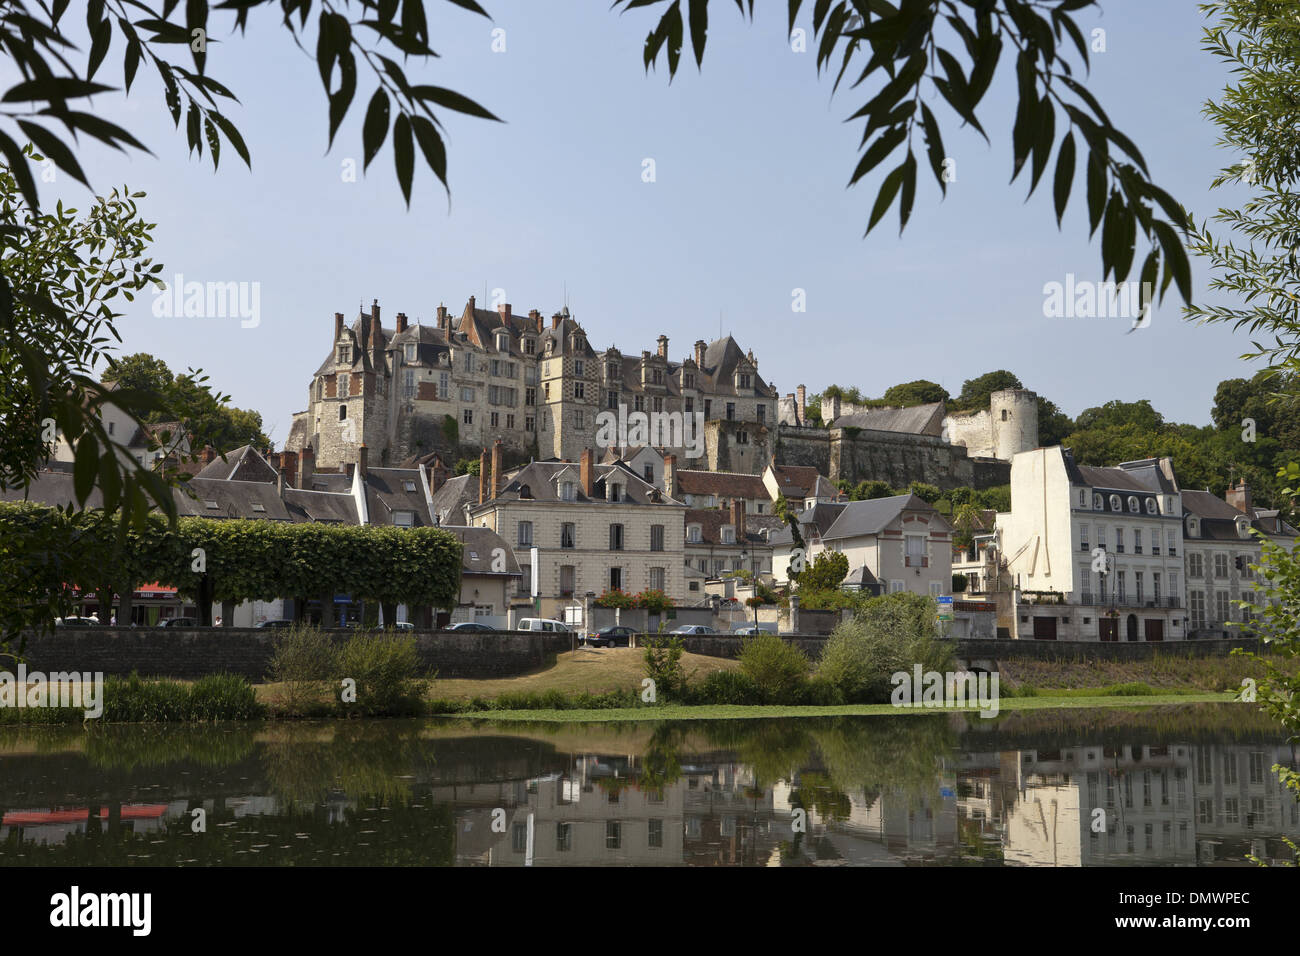 View of the Chateau Saint-Aignan from across the river looking towards the town Stock Photo